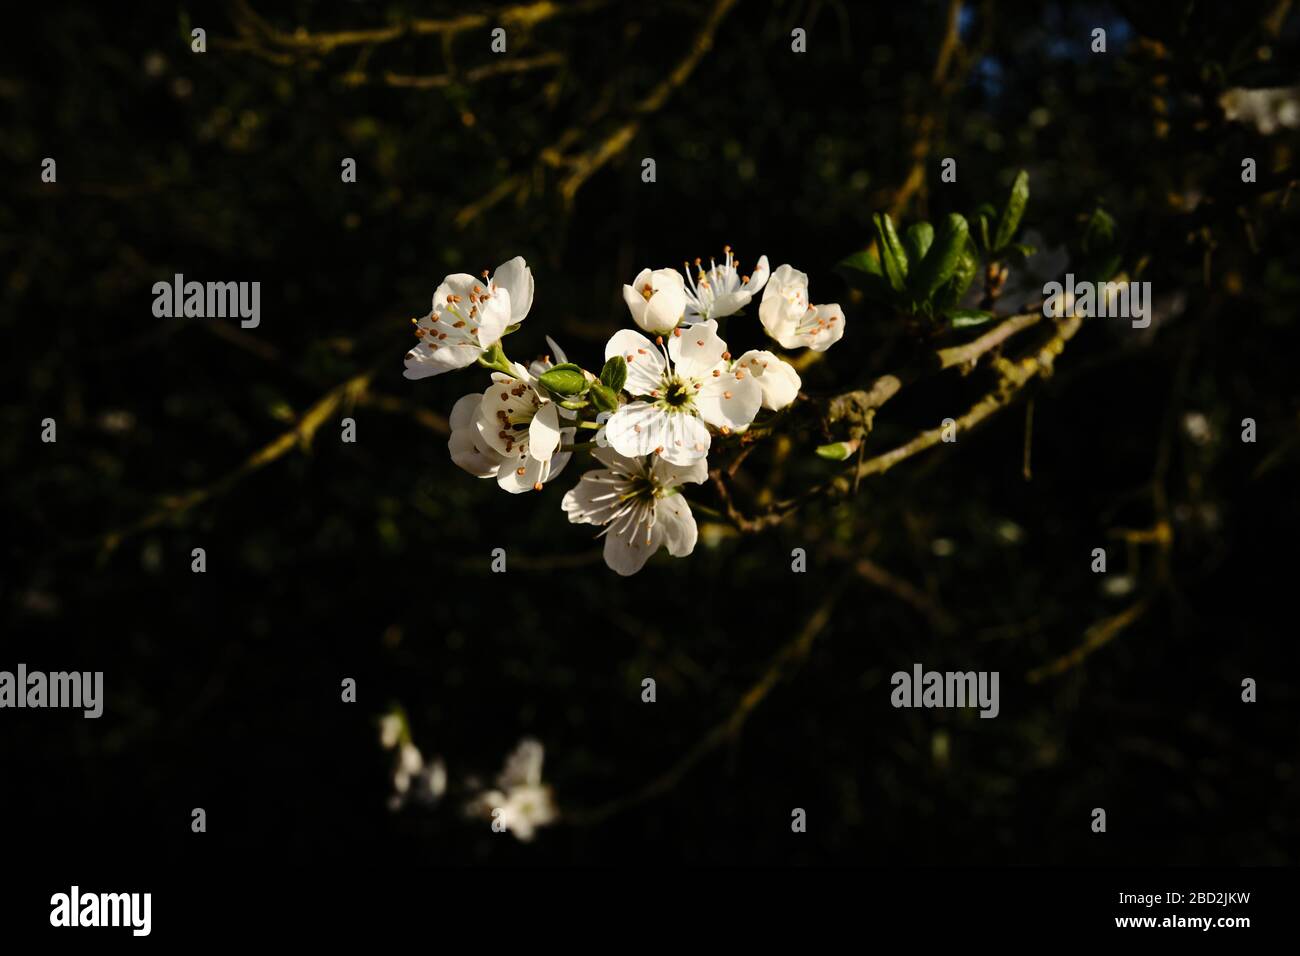 Wild damson blossom Prunus domestica insititia white petals lit by evening sun with shaded background Stock Photo